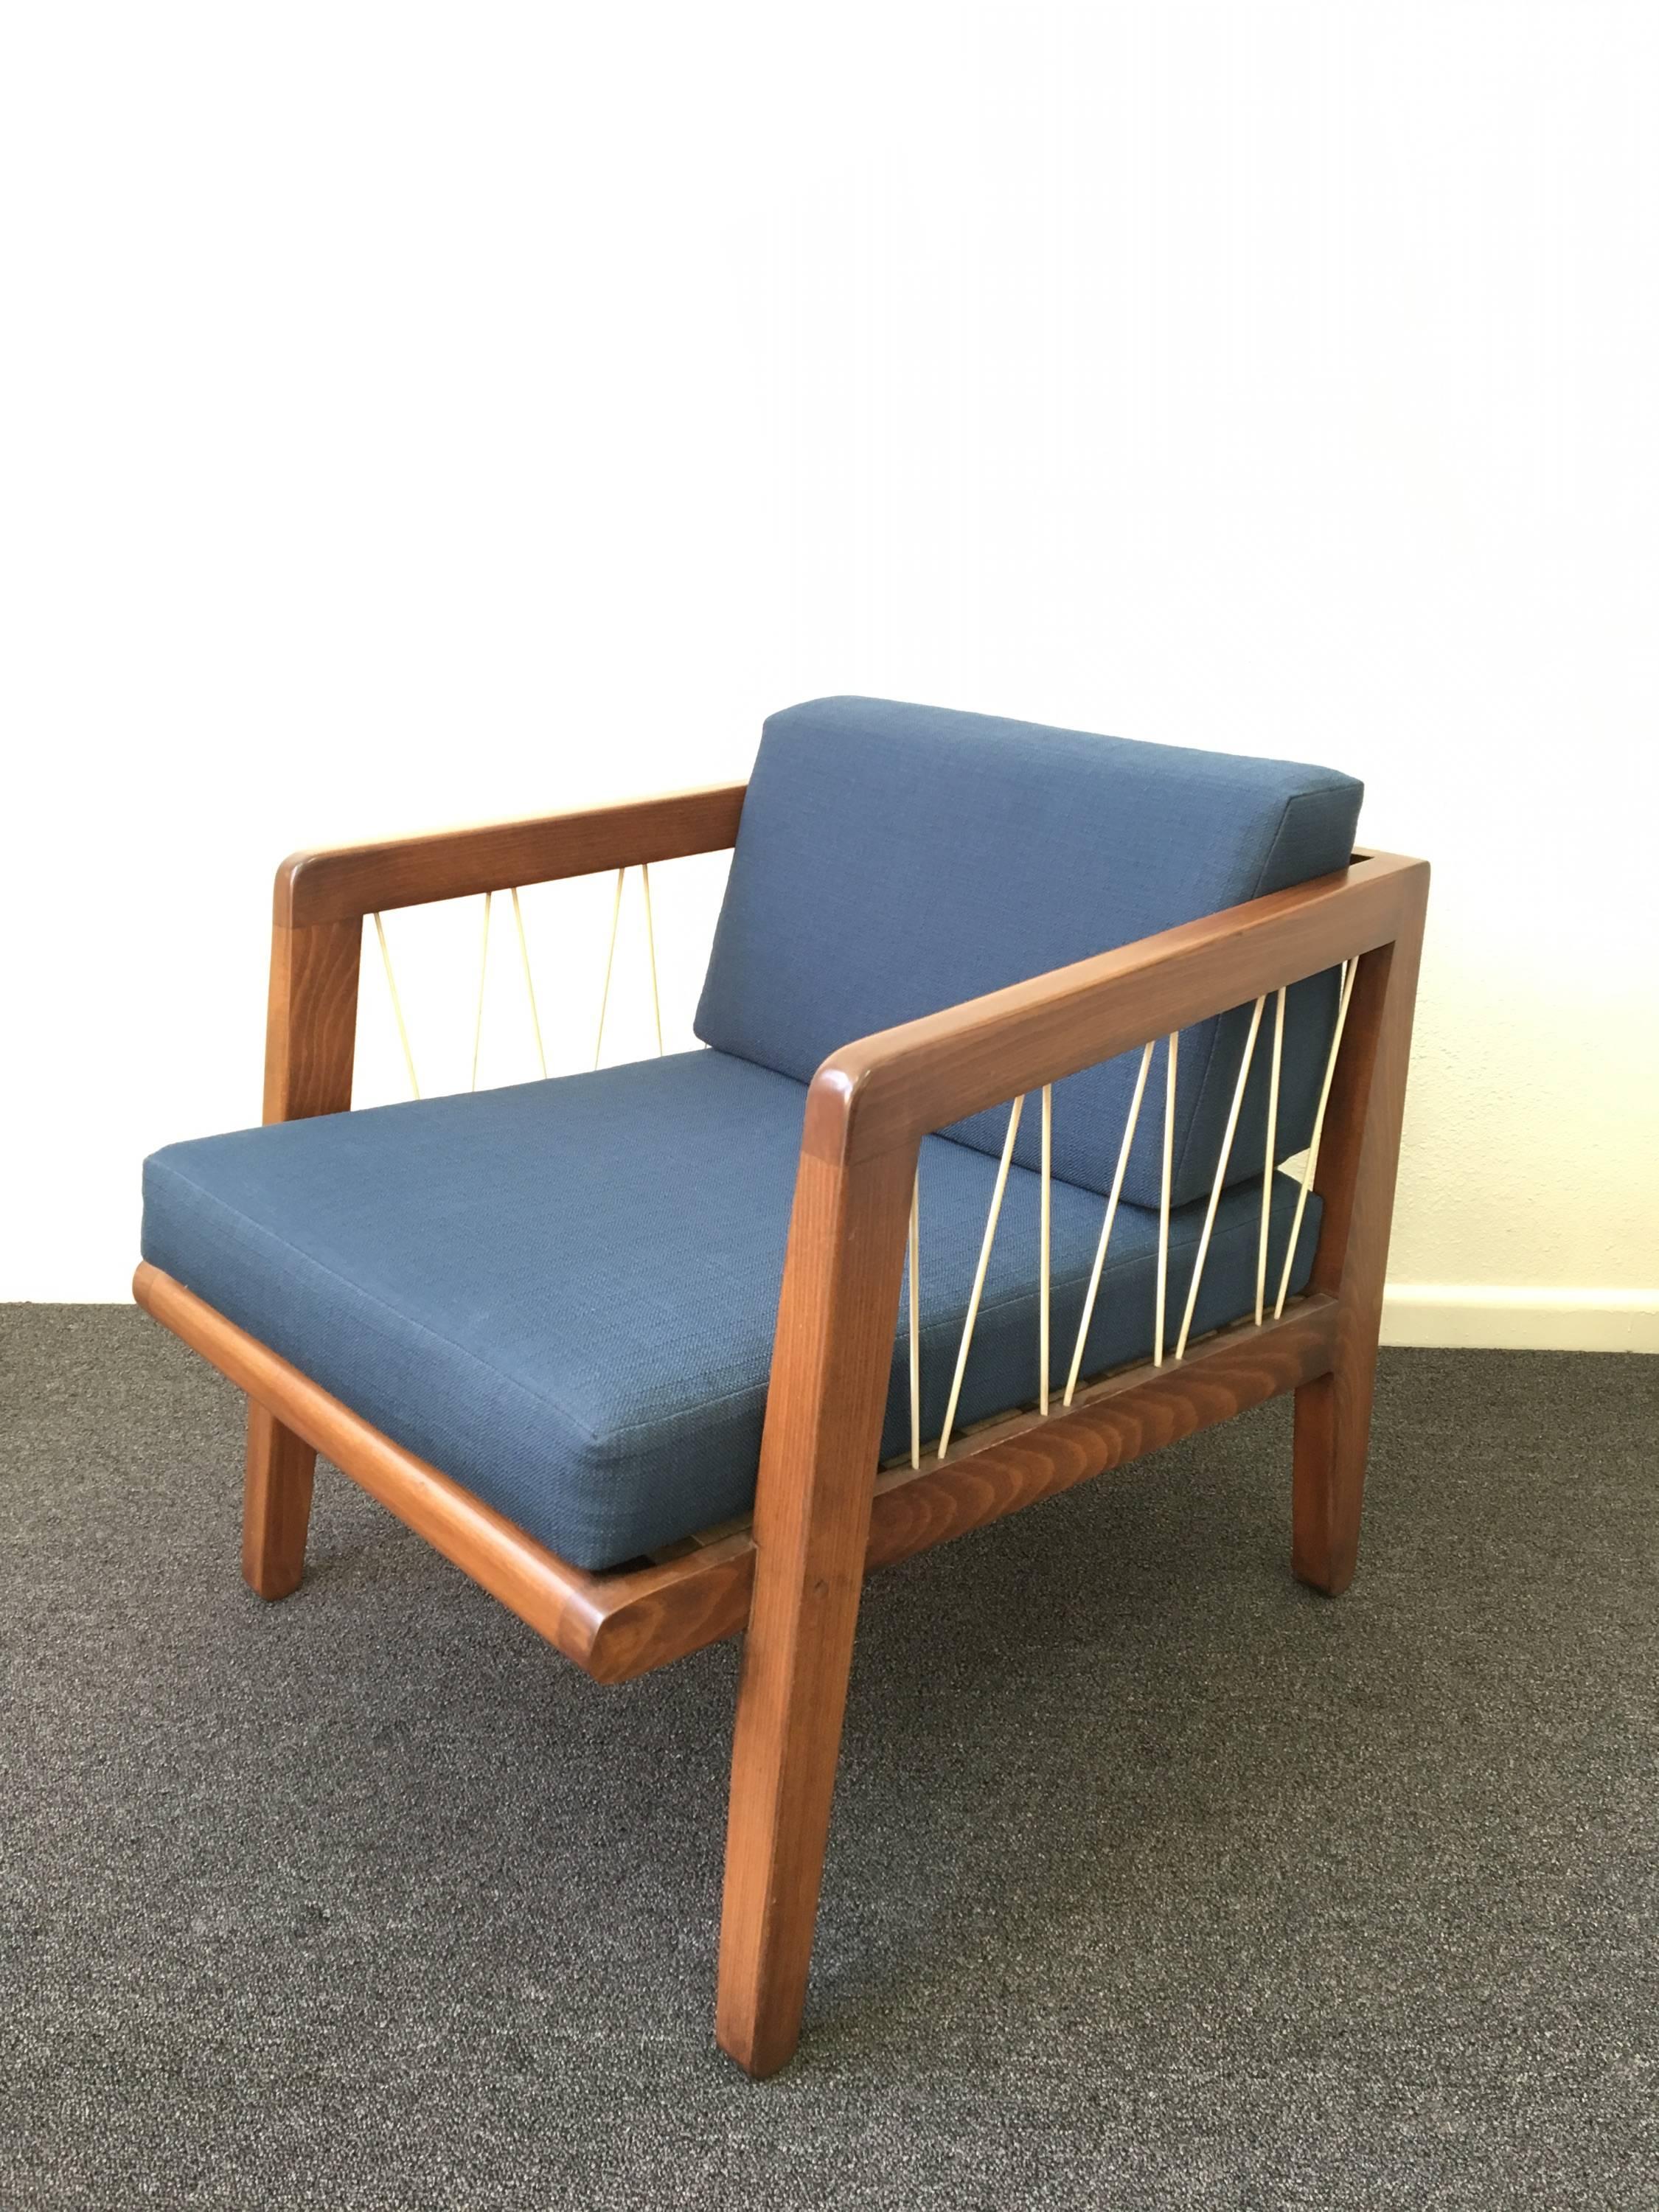 Stained Pair of Lounge Chairs by Edward Wormley for Drexel